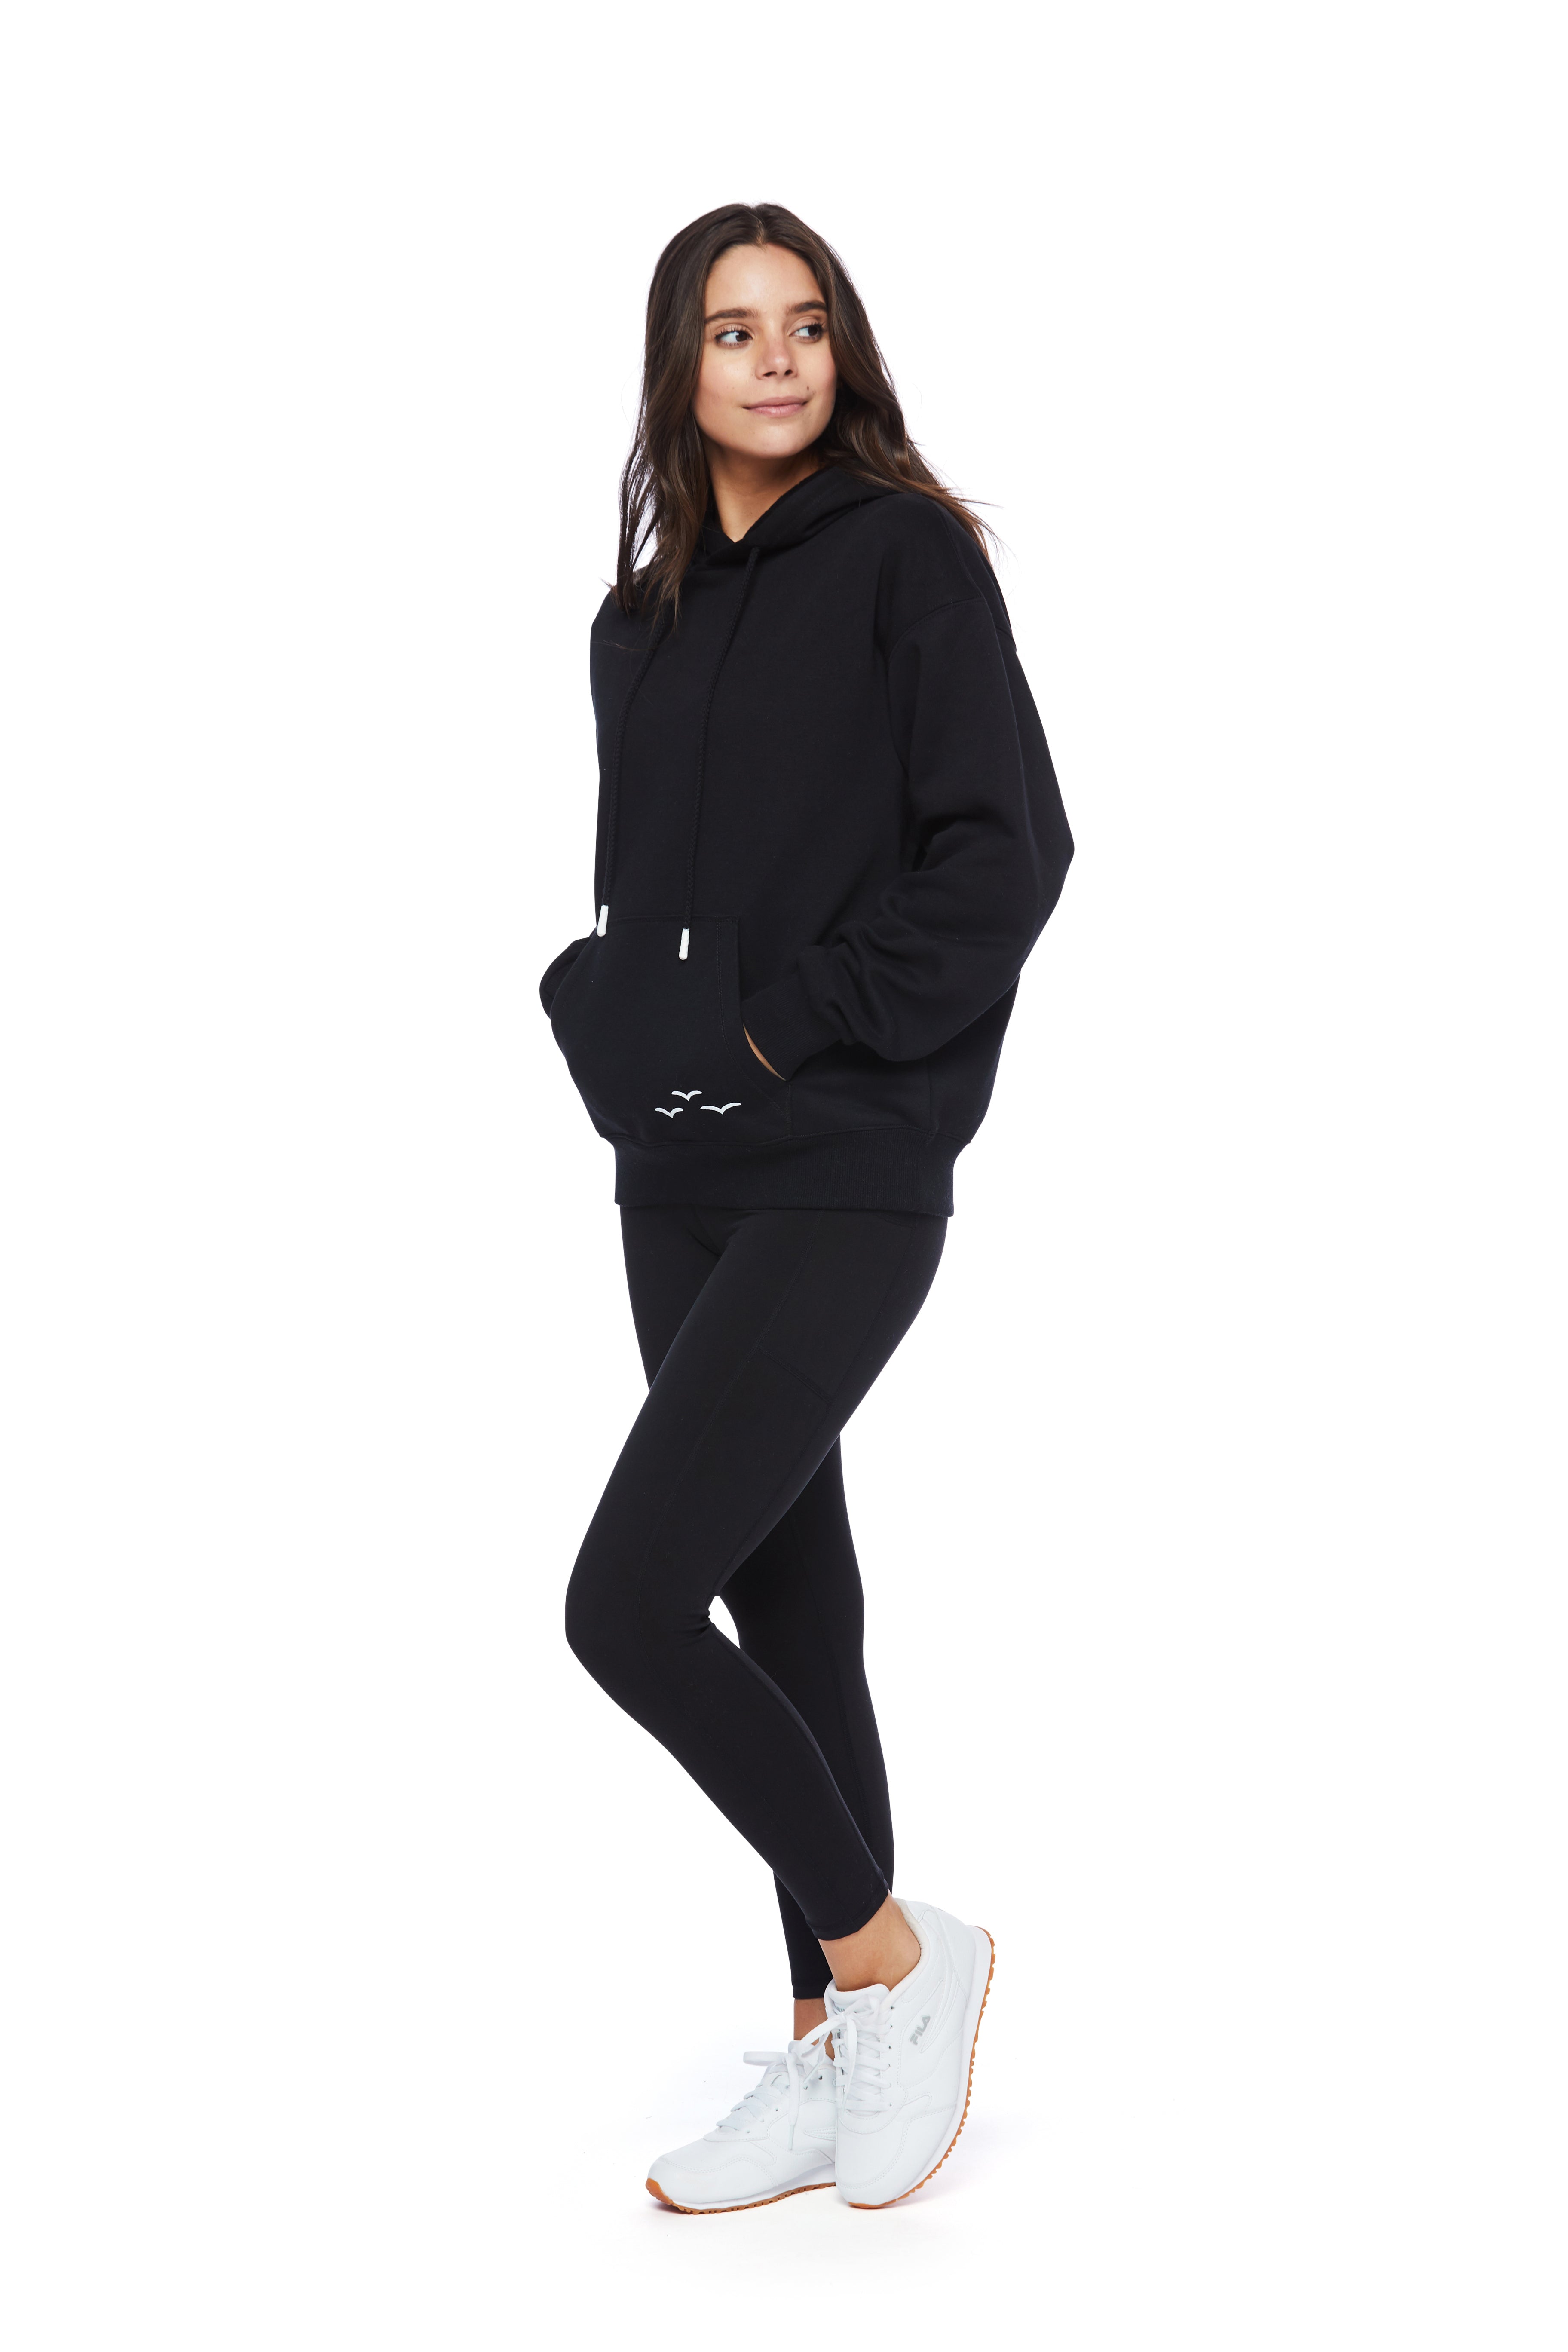 Chloe Relaxed Fit Hoodie in Black from Lazypants - always a great buy at a reasonable price.